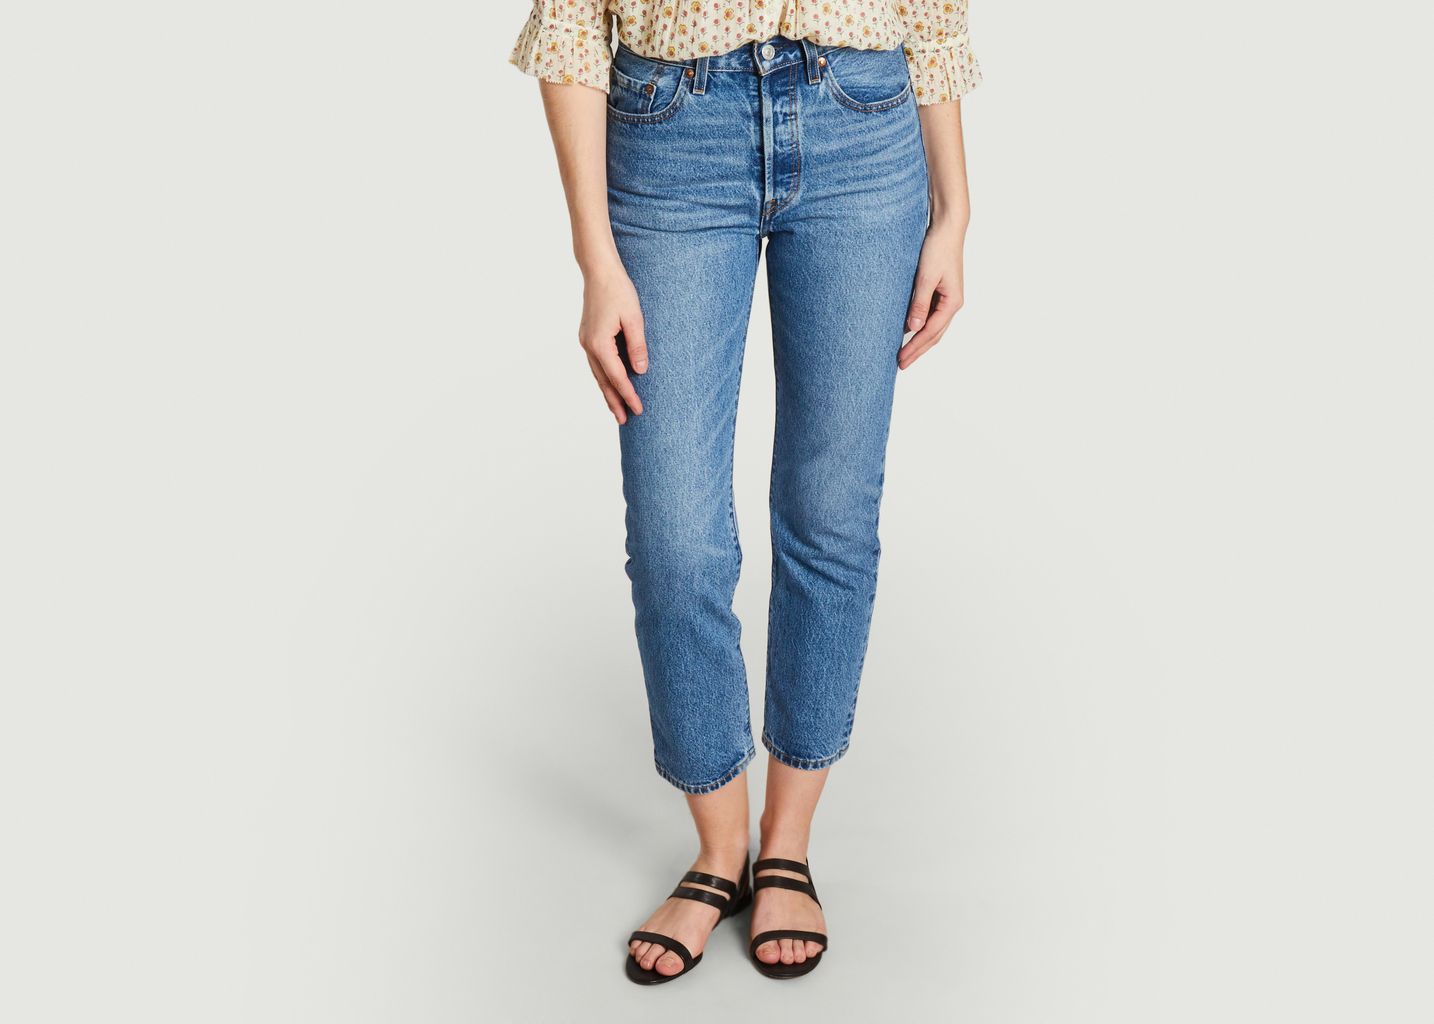 Levi's 501Crop Jeans - Levi's Red Tab